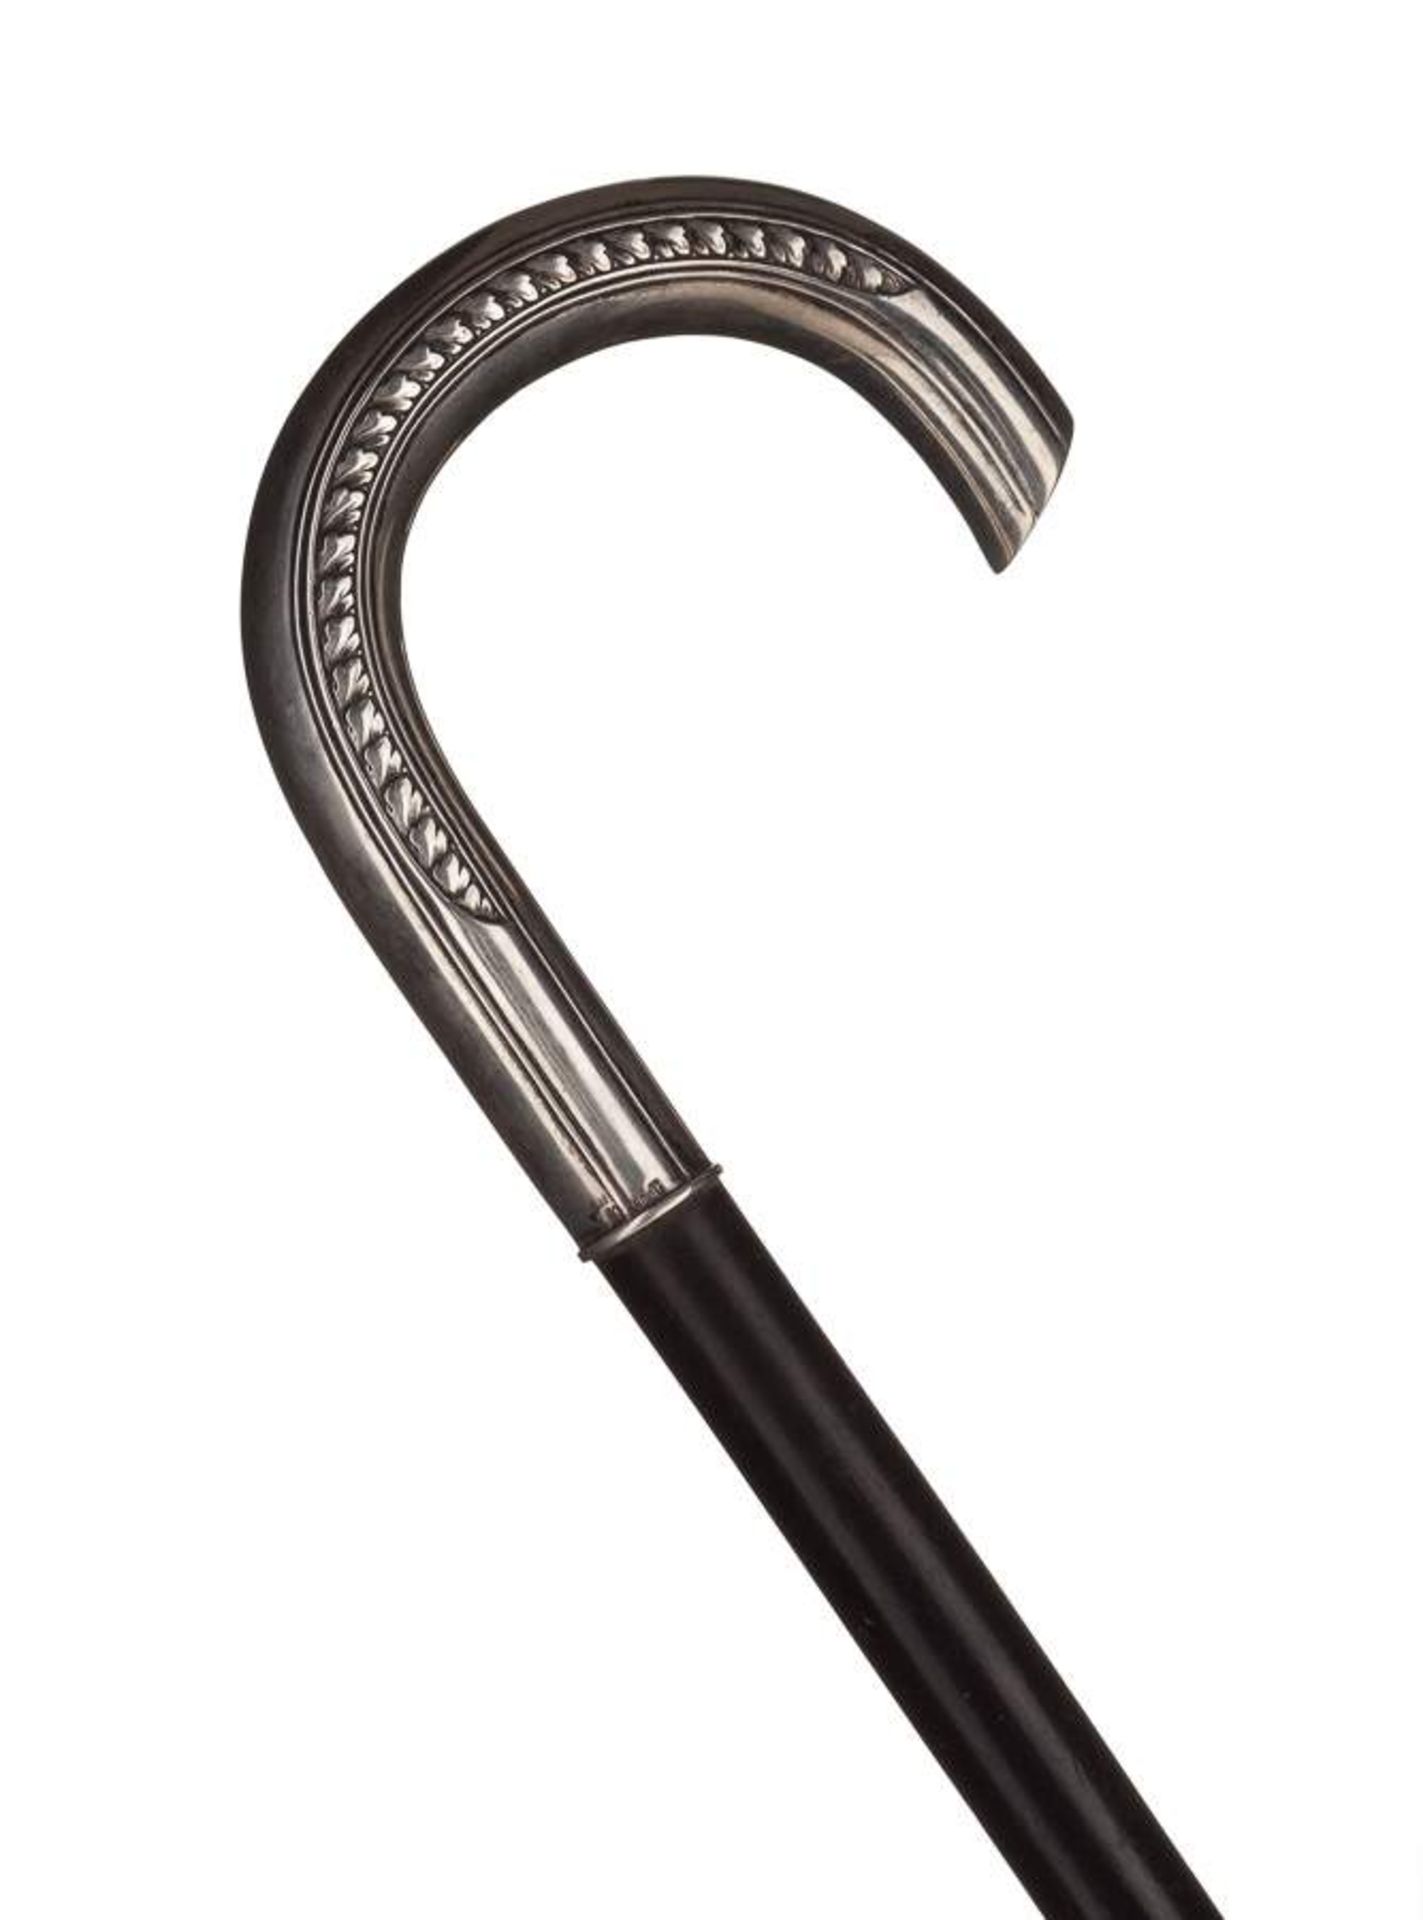 Spazierstock / Walkingstick Griff 800/000 Silber, L: ca. 92 cm / handle 800/000 silver, length: c.